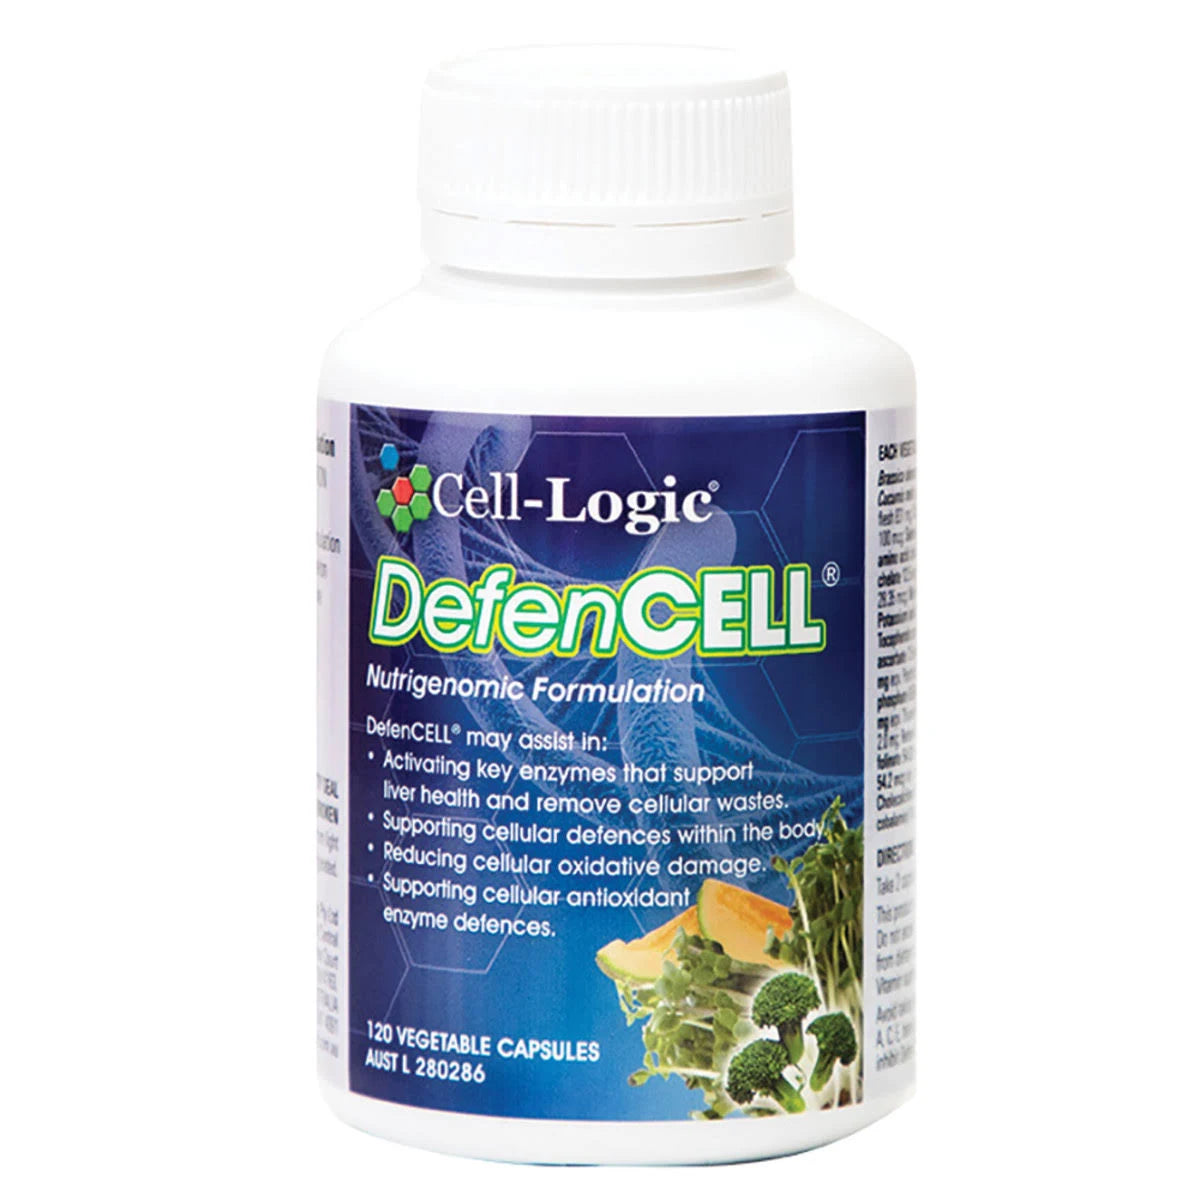 DefenCELL